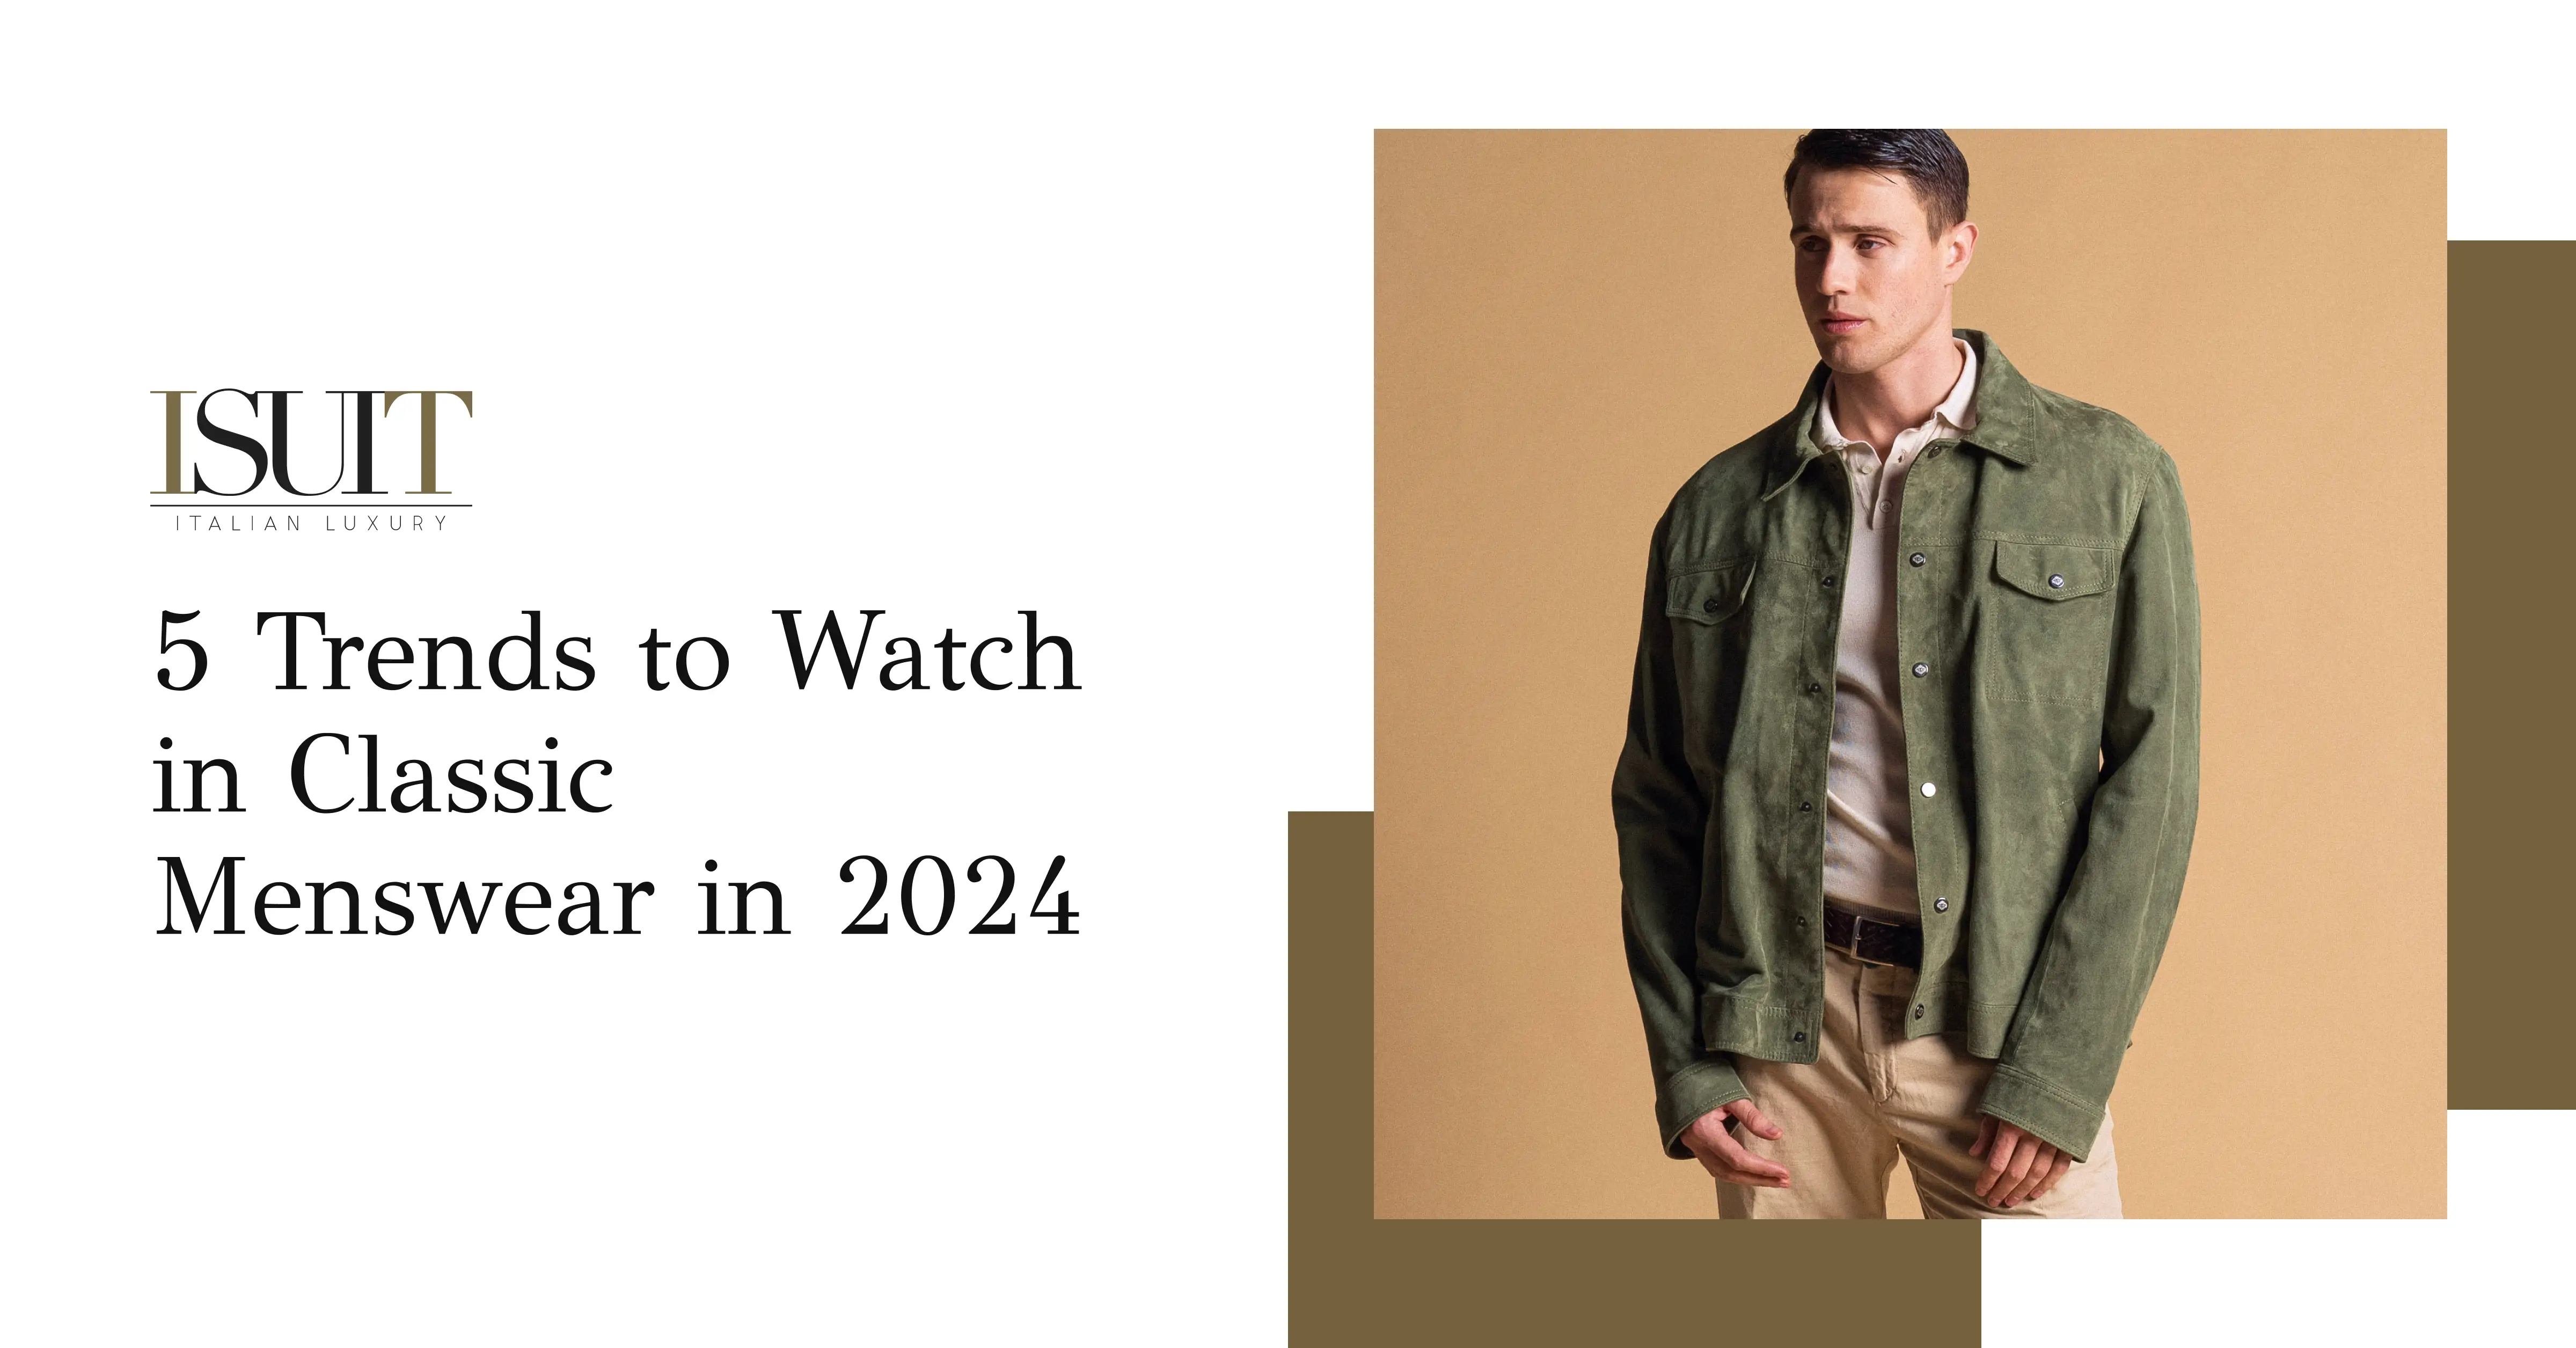 5 Trends to Watch in Classic Menswear in 2024